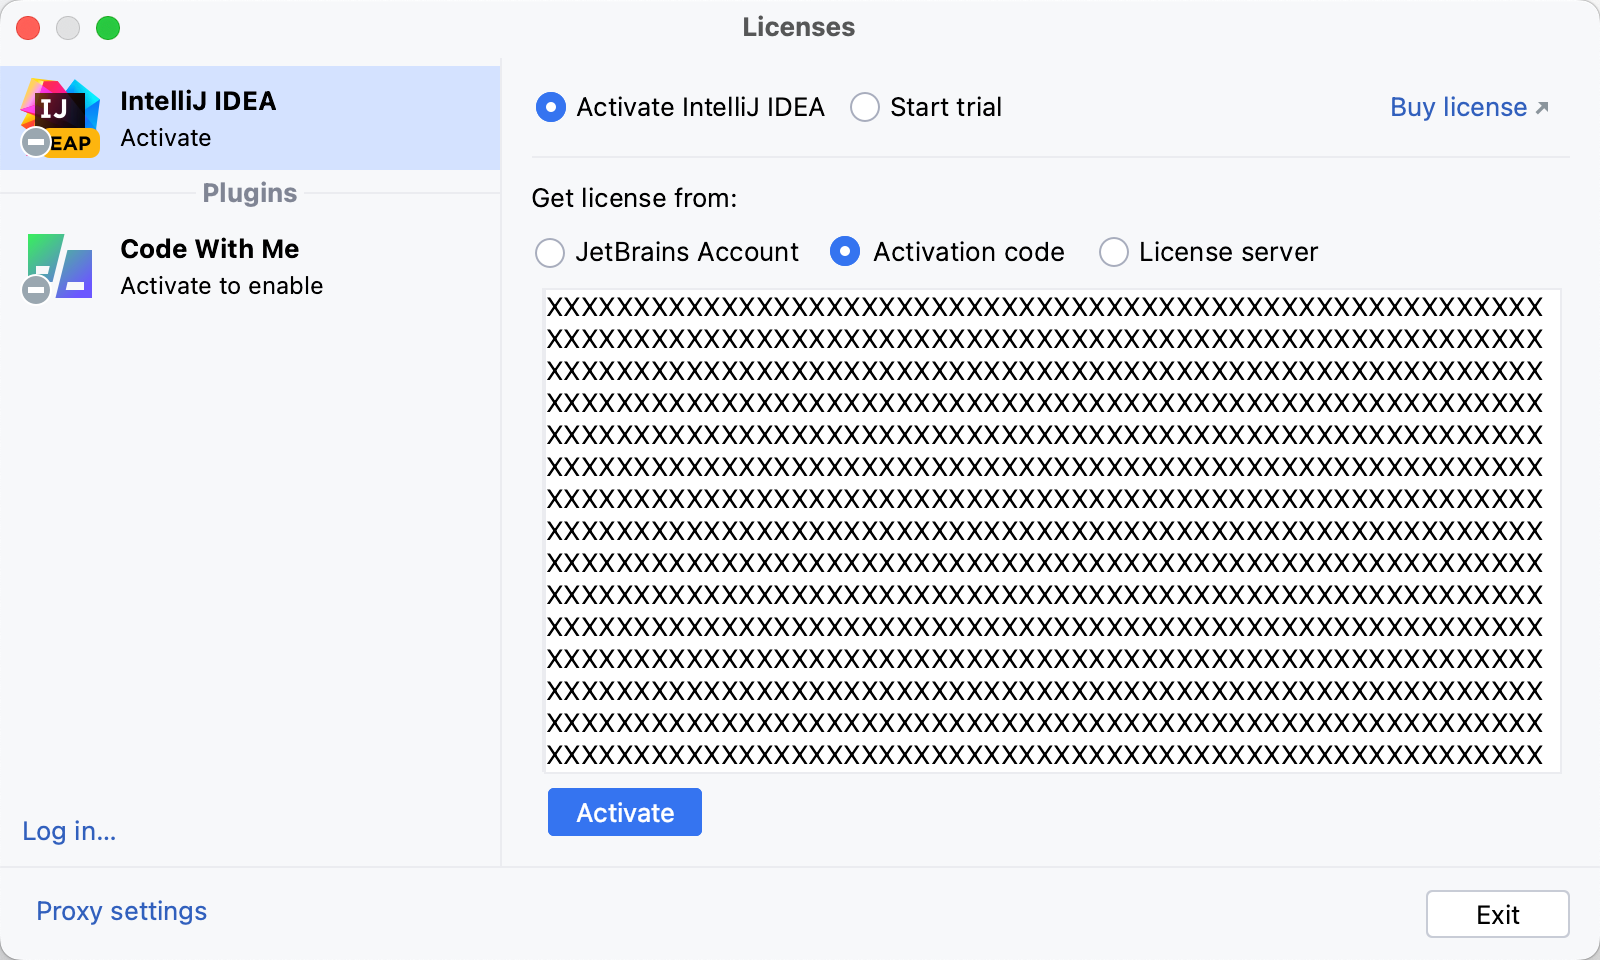 Activate IntelliJ IDEA license with an activation code